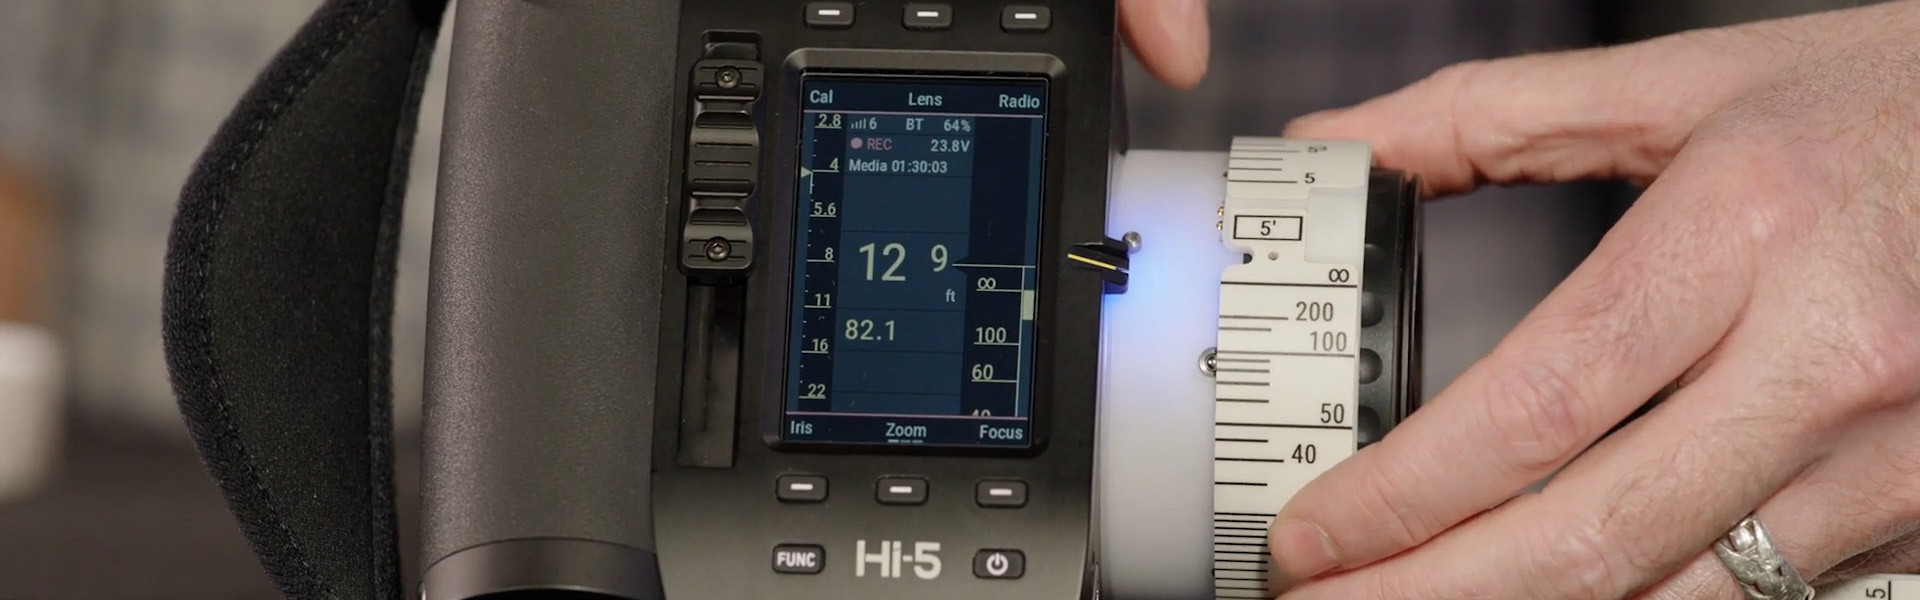 Header image for article An In-Depth Look at the ARRI Hi-5